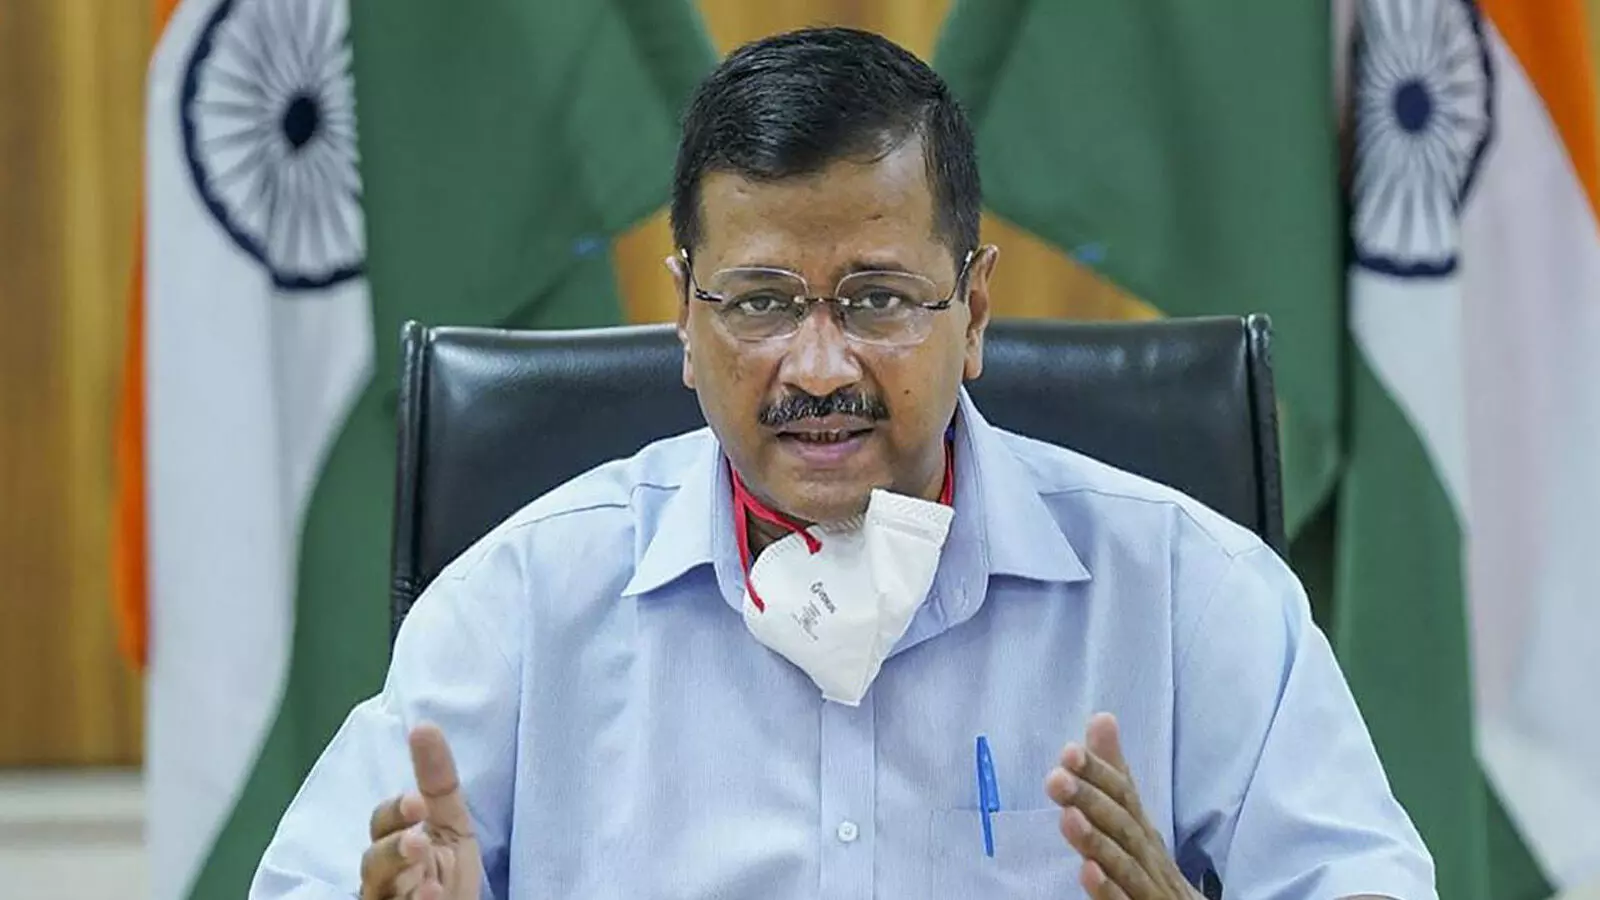 COVID-19 situation worse this time in National Capital, says Arvind Kejriwal